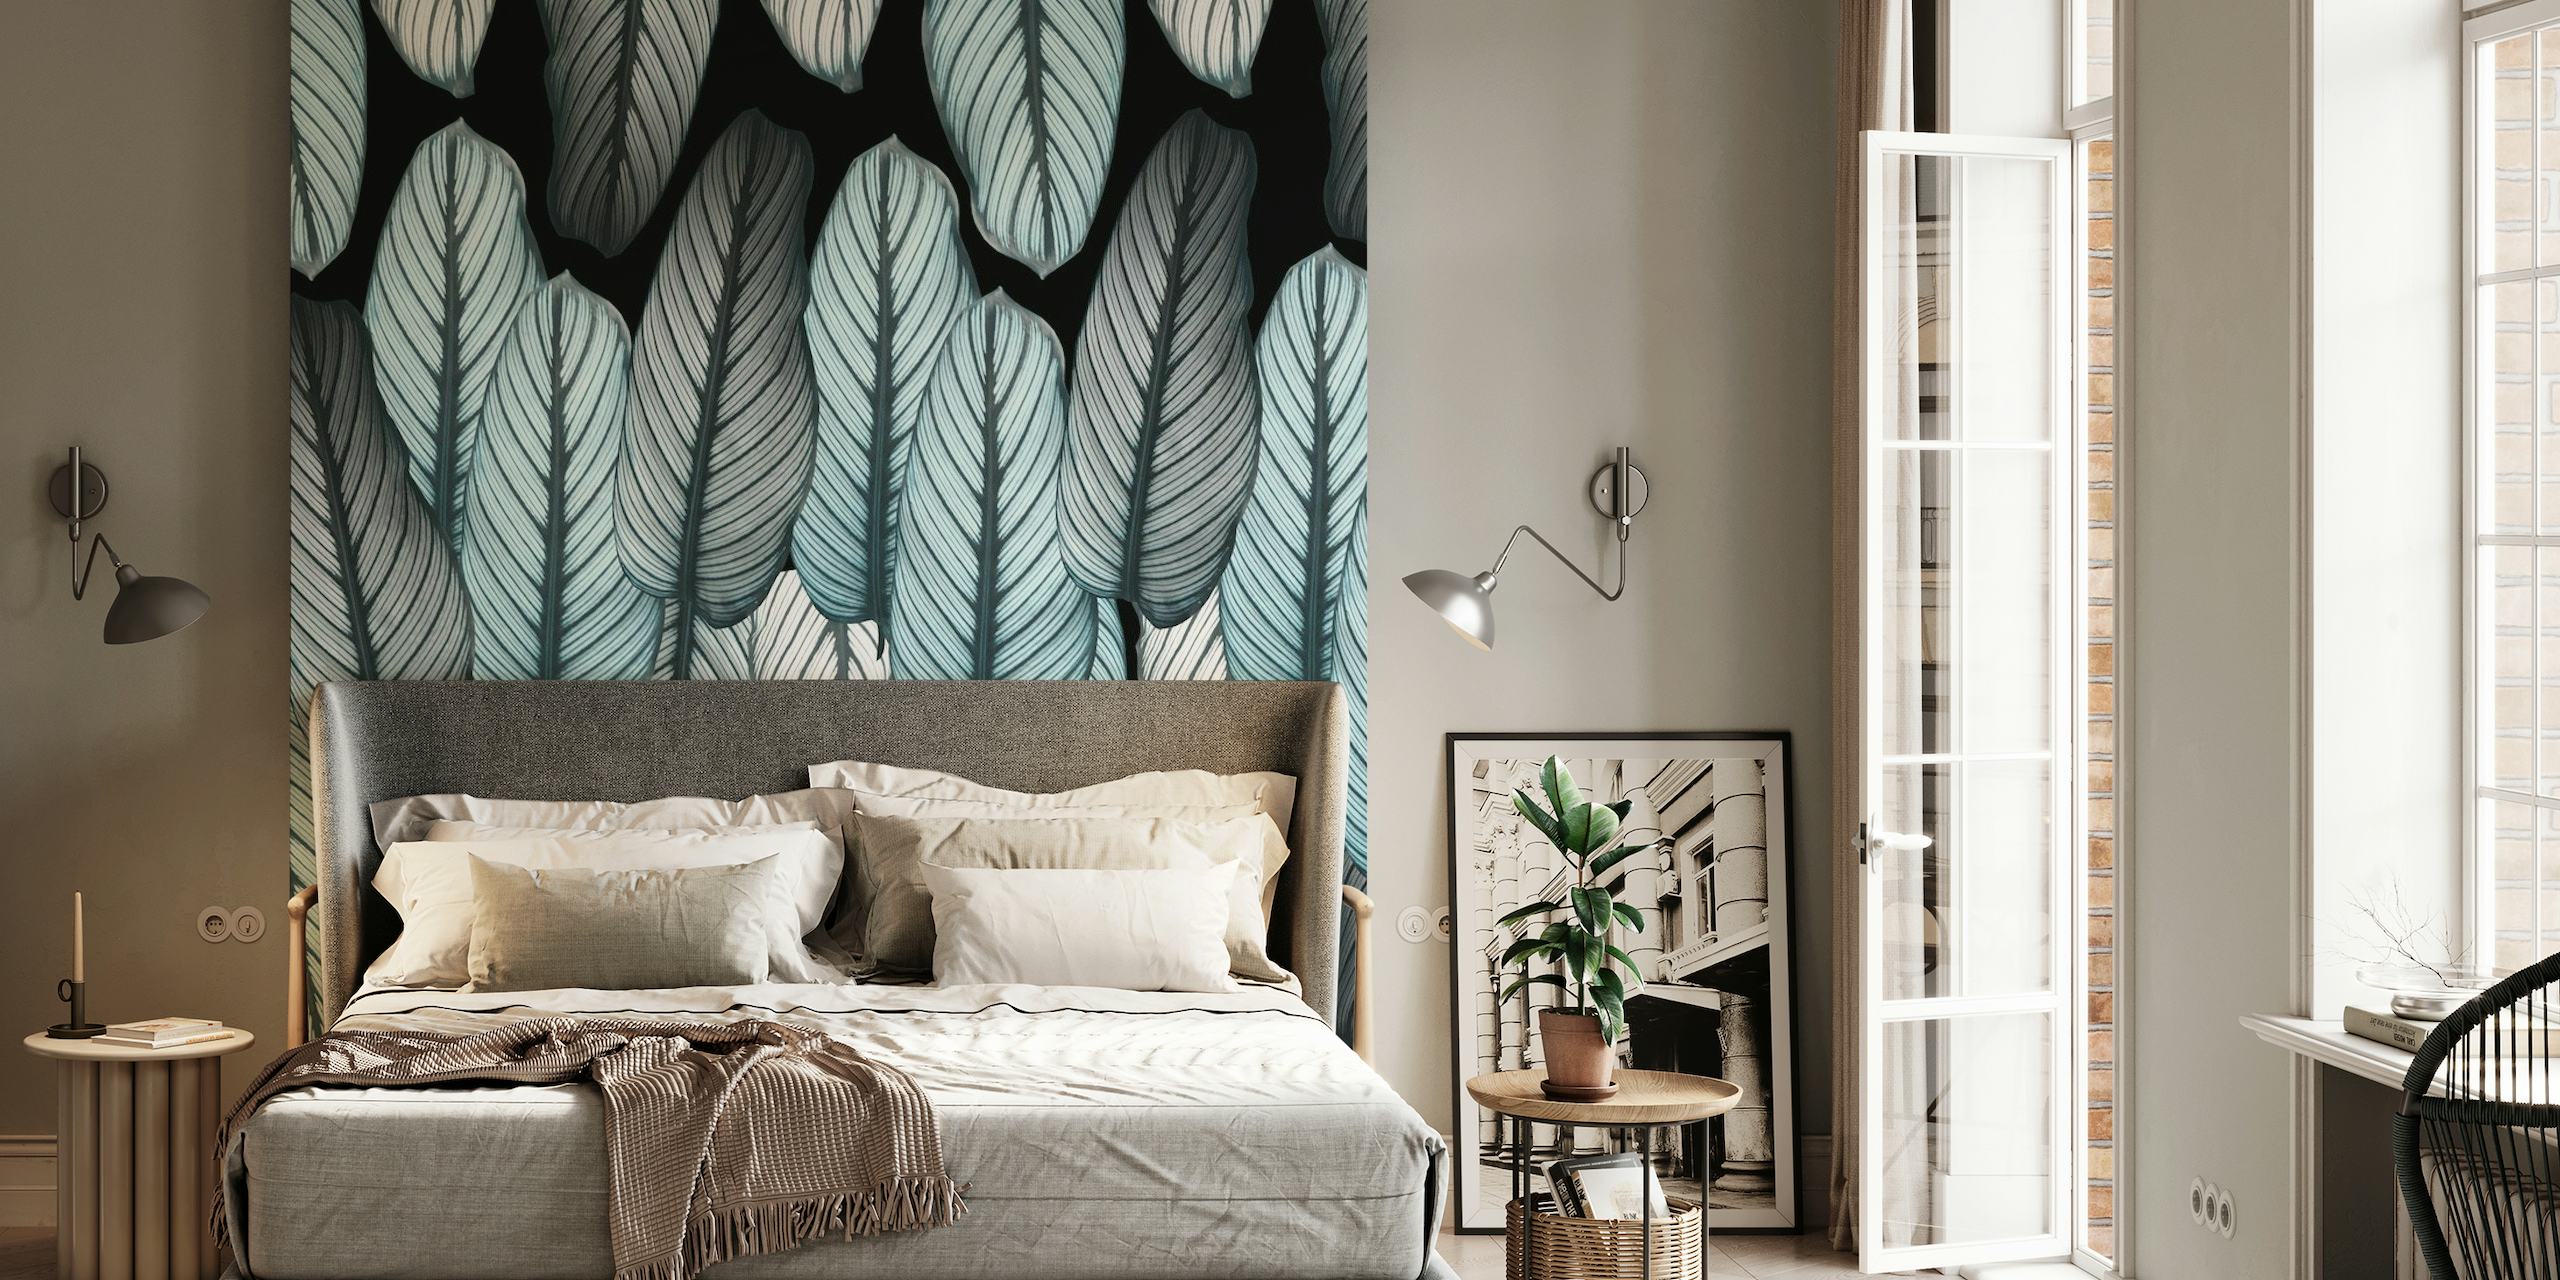 Calathea Leaves Pattern Wall Mural with a dark background